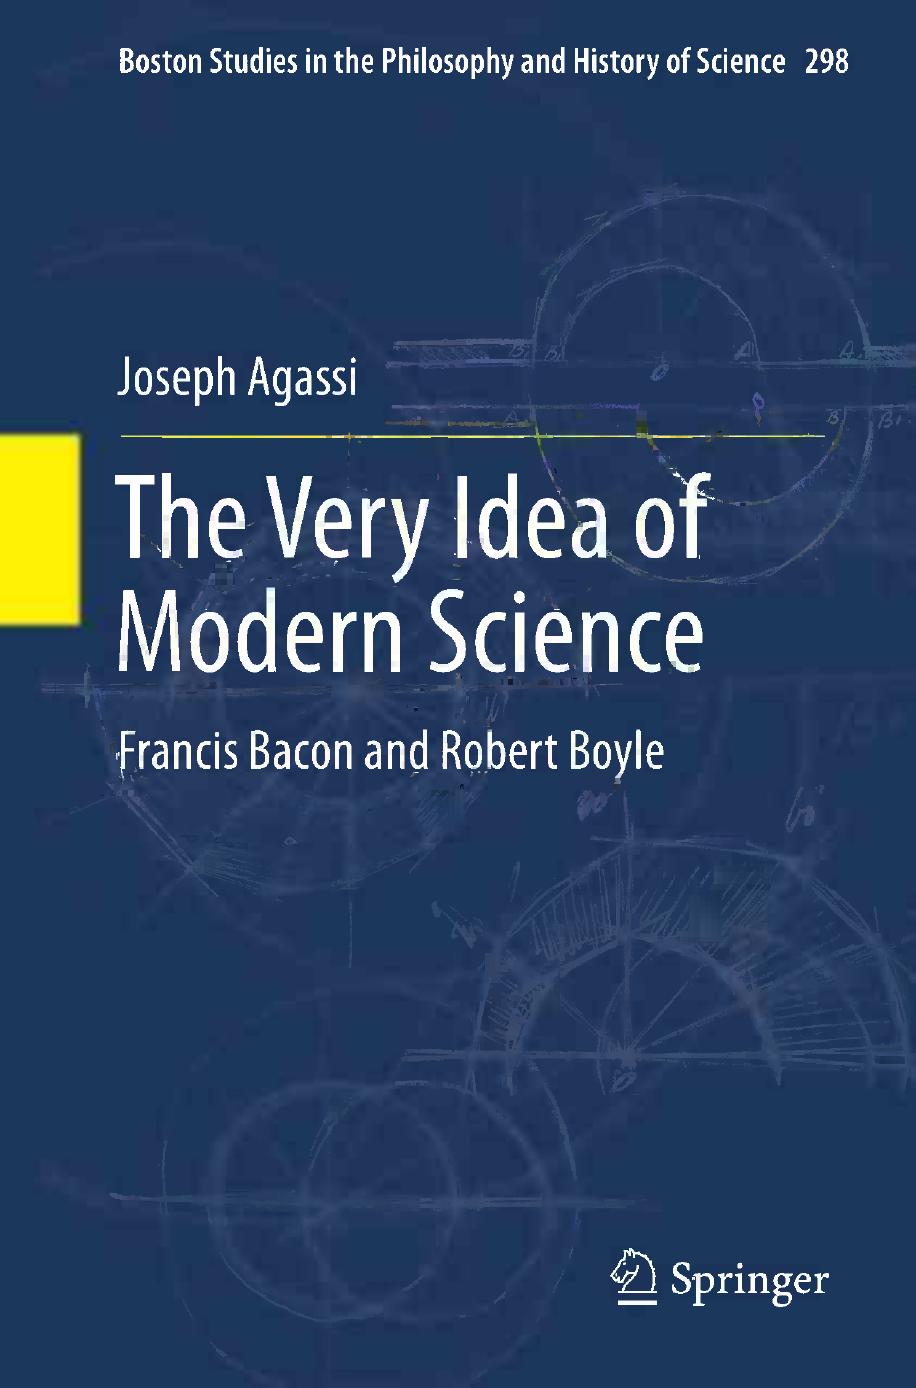 The Very Idea of Modern Science: Francis Bacon and Robert Boyle